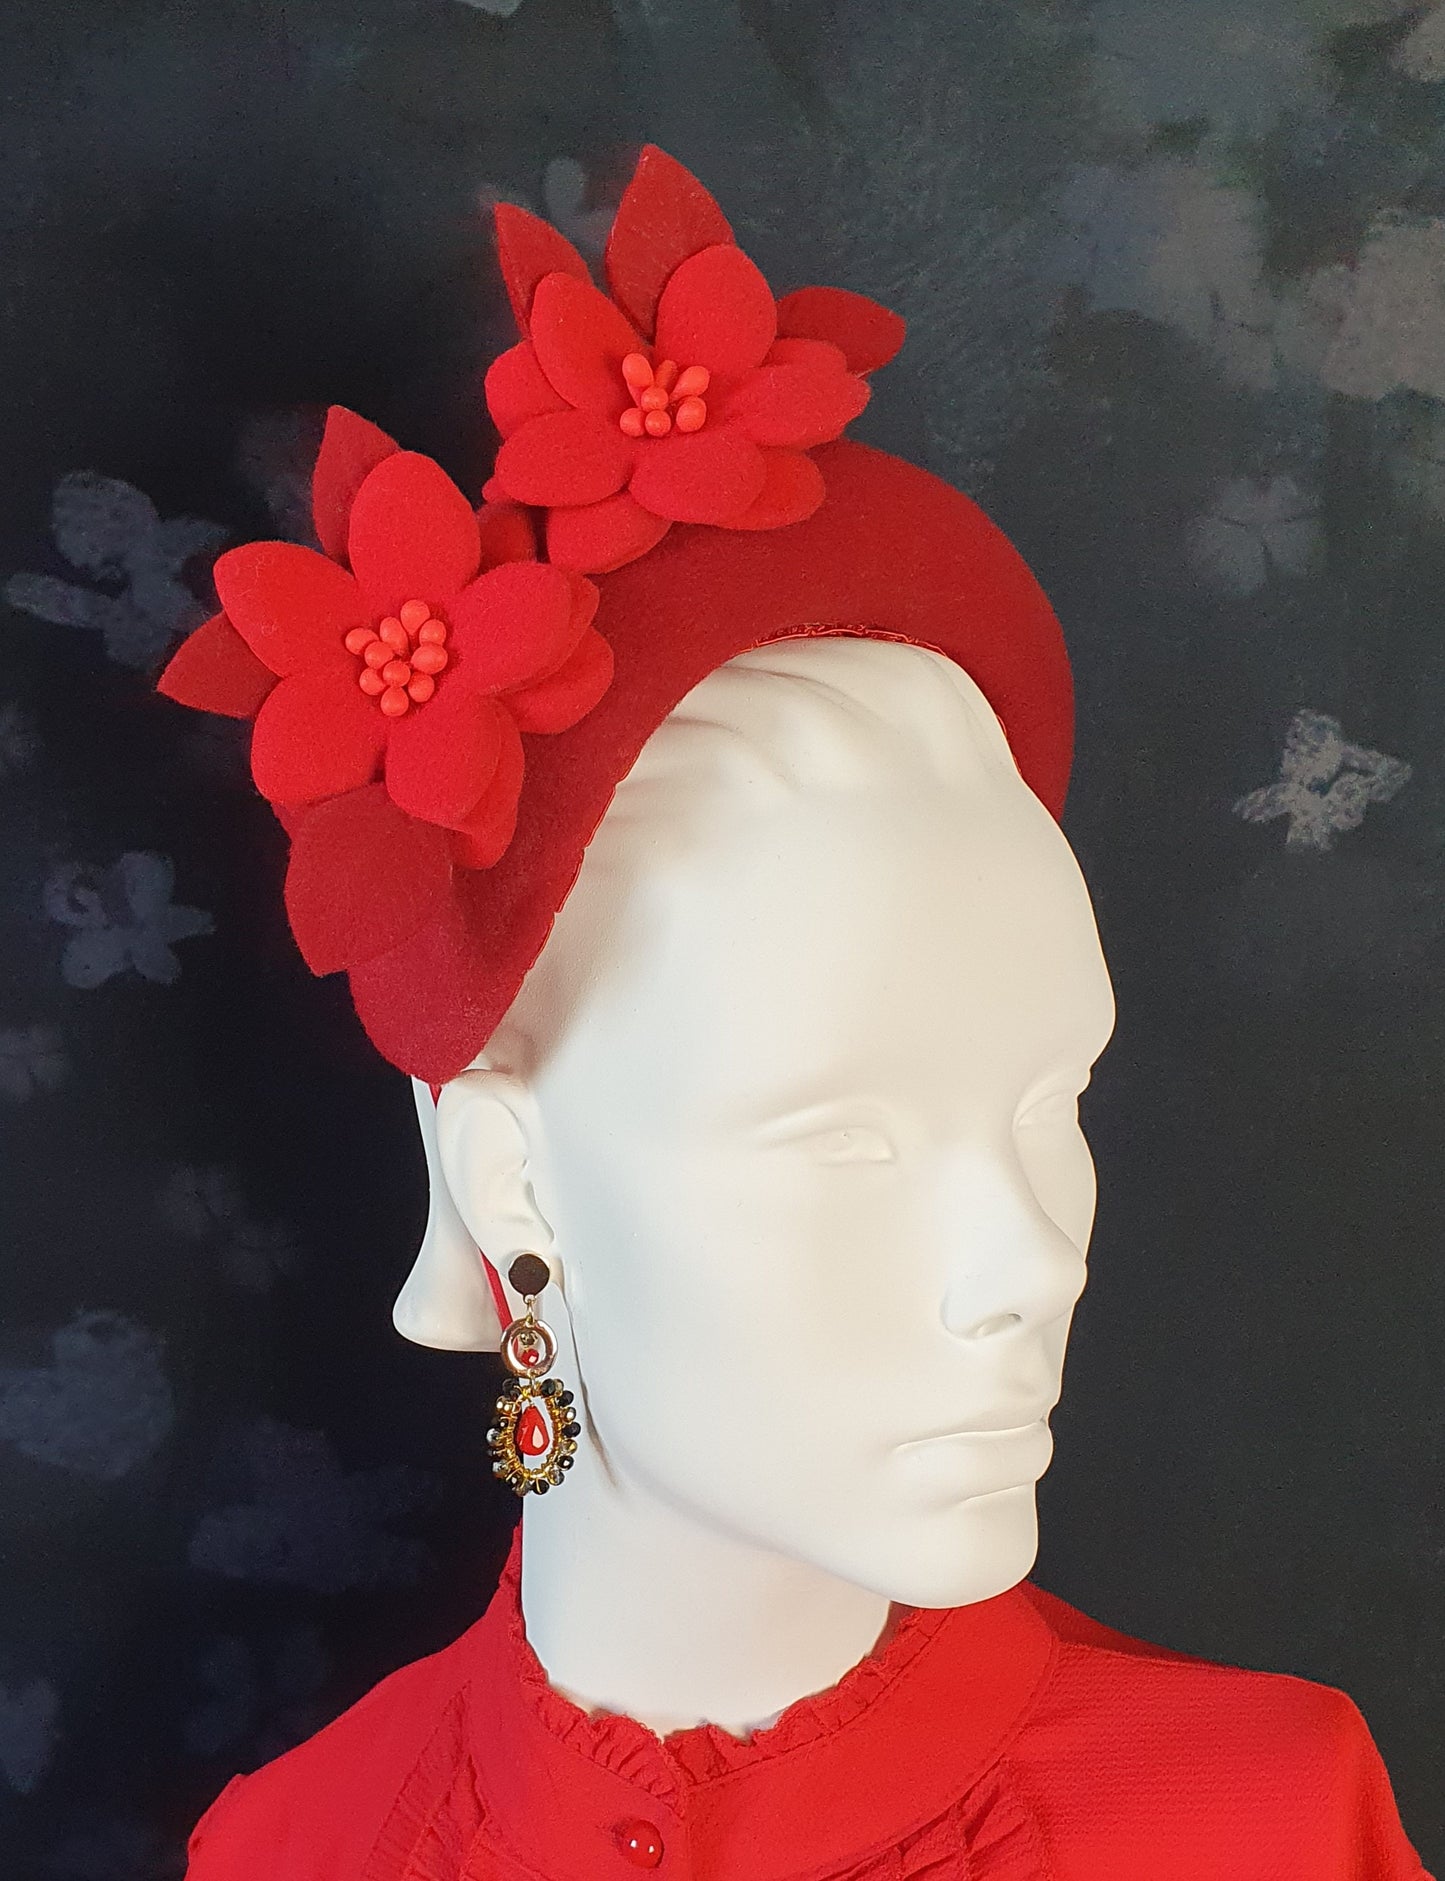 Red felt headband with flowers and leaves - handmade accessory for guests, brides &amp; special occasions